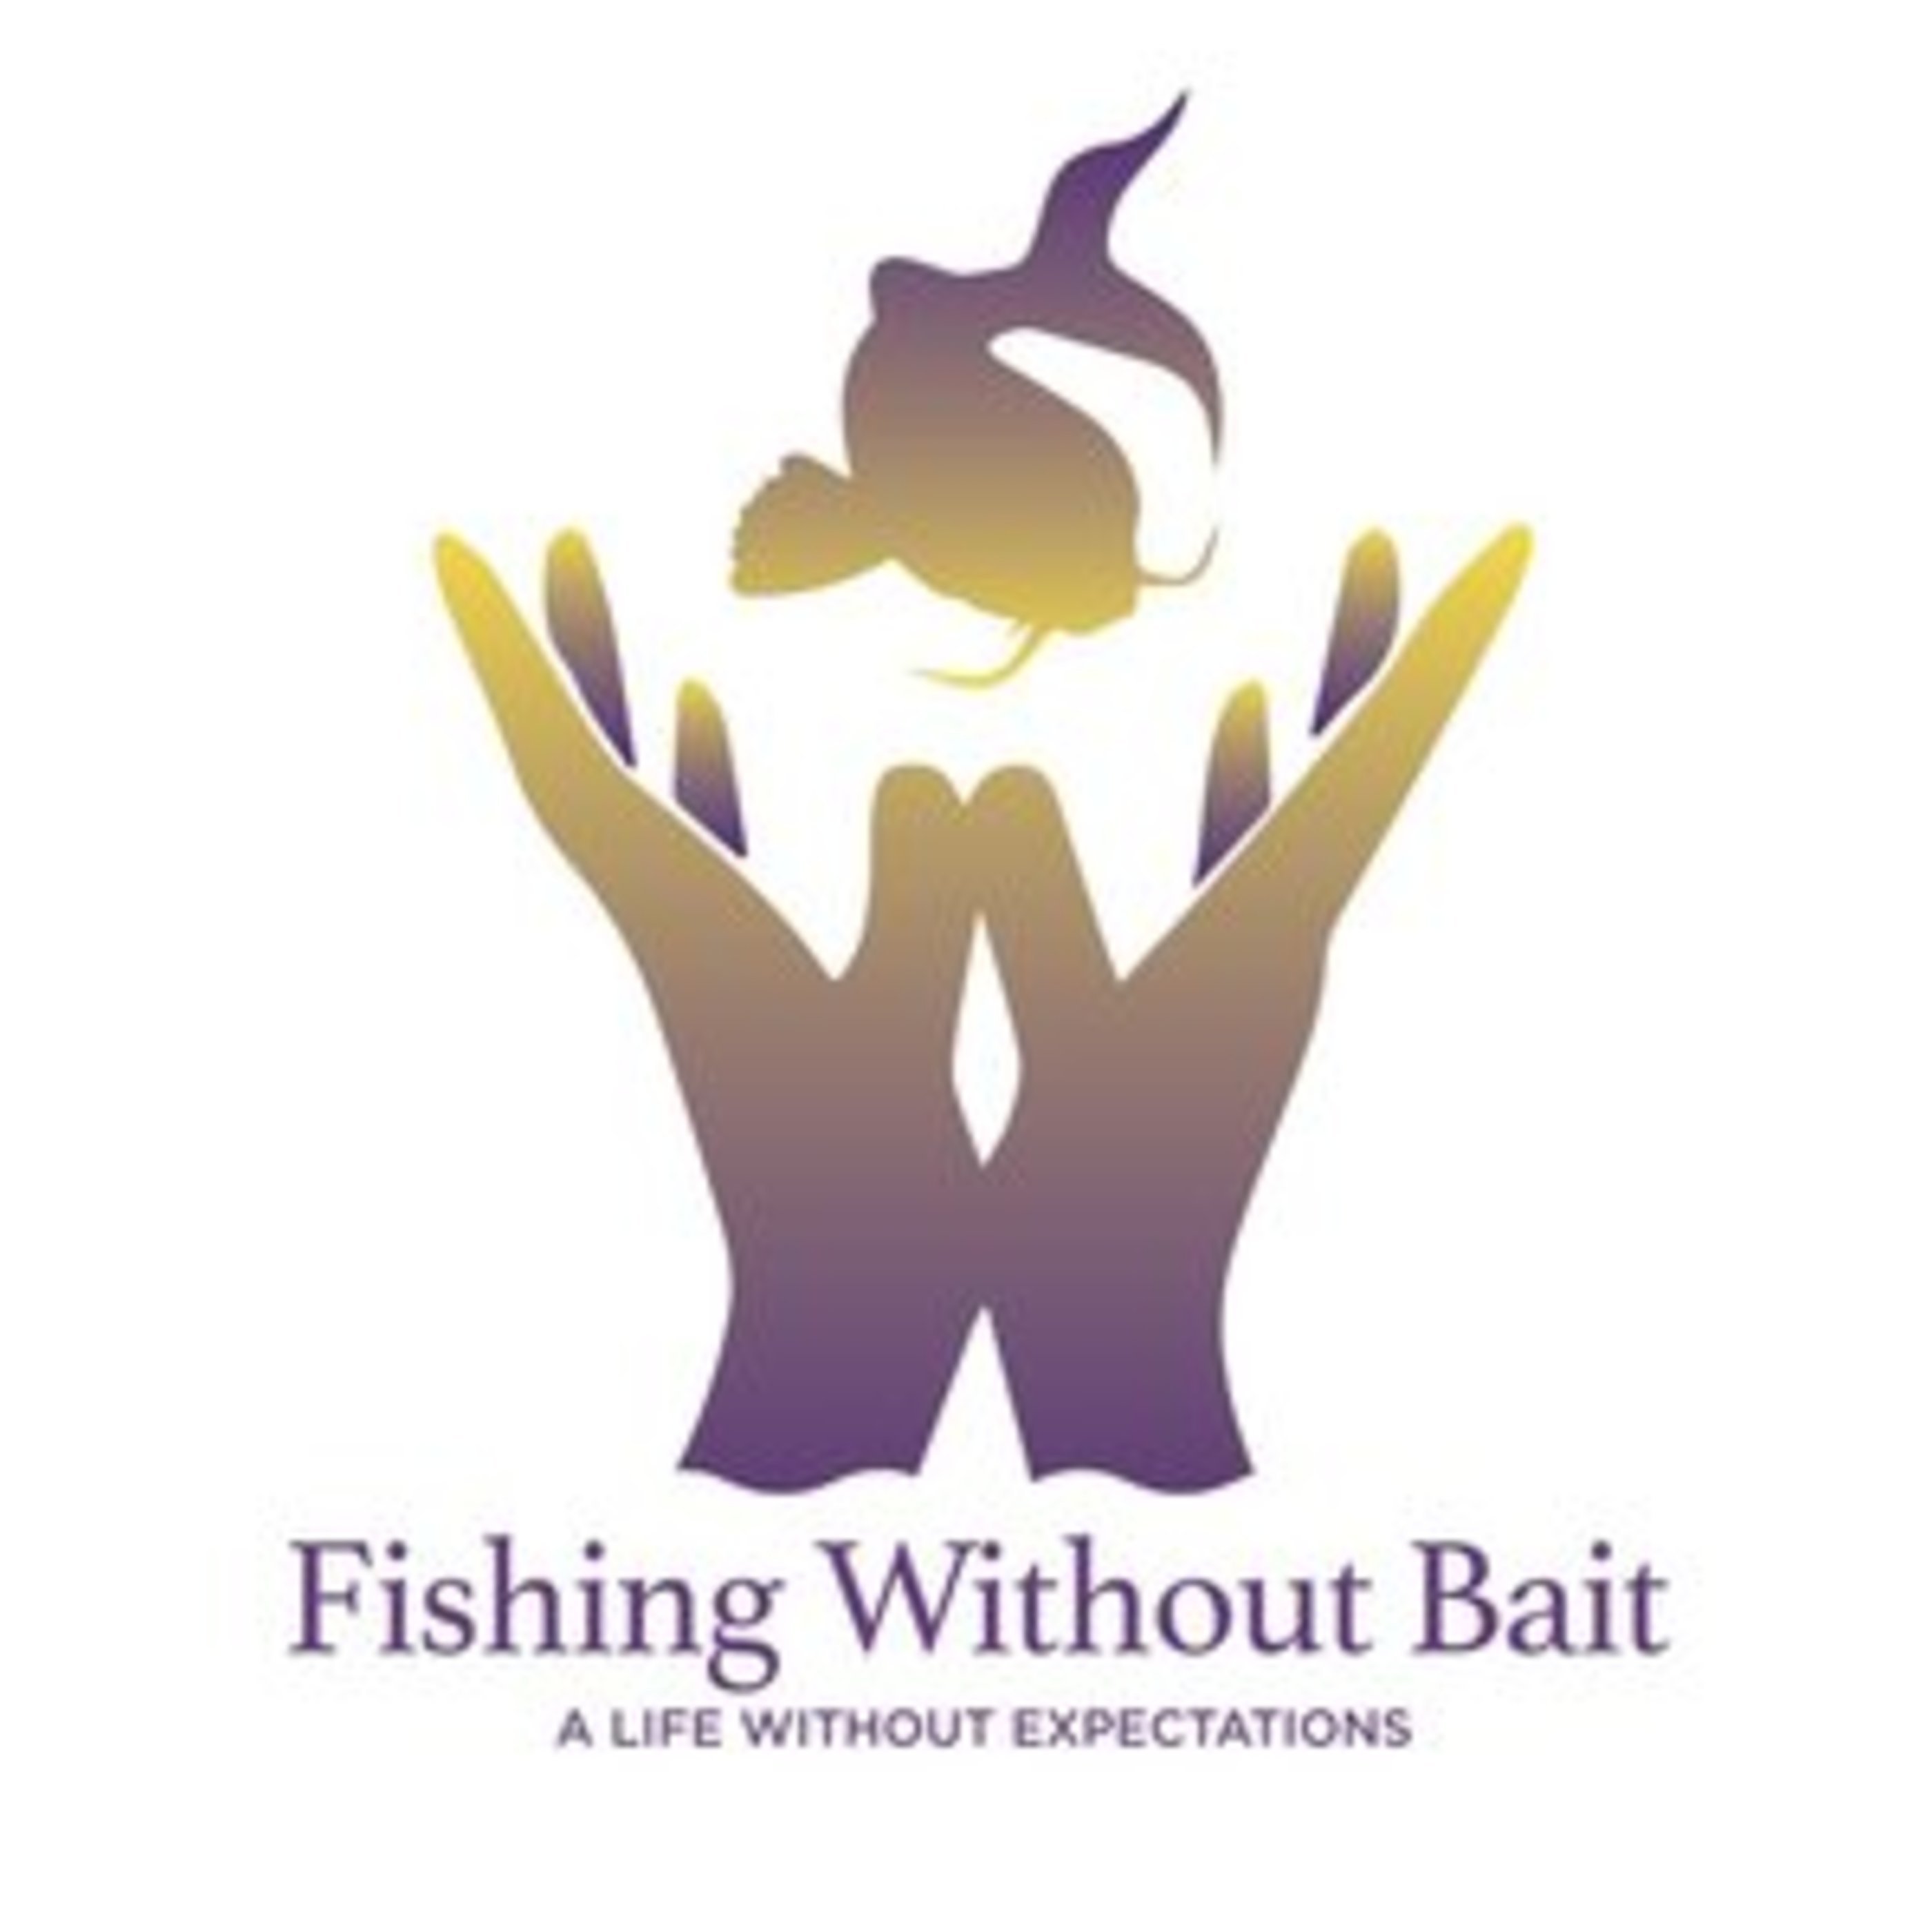 Fishing Without Bait: A Full Impact Mindfulness Podcast